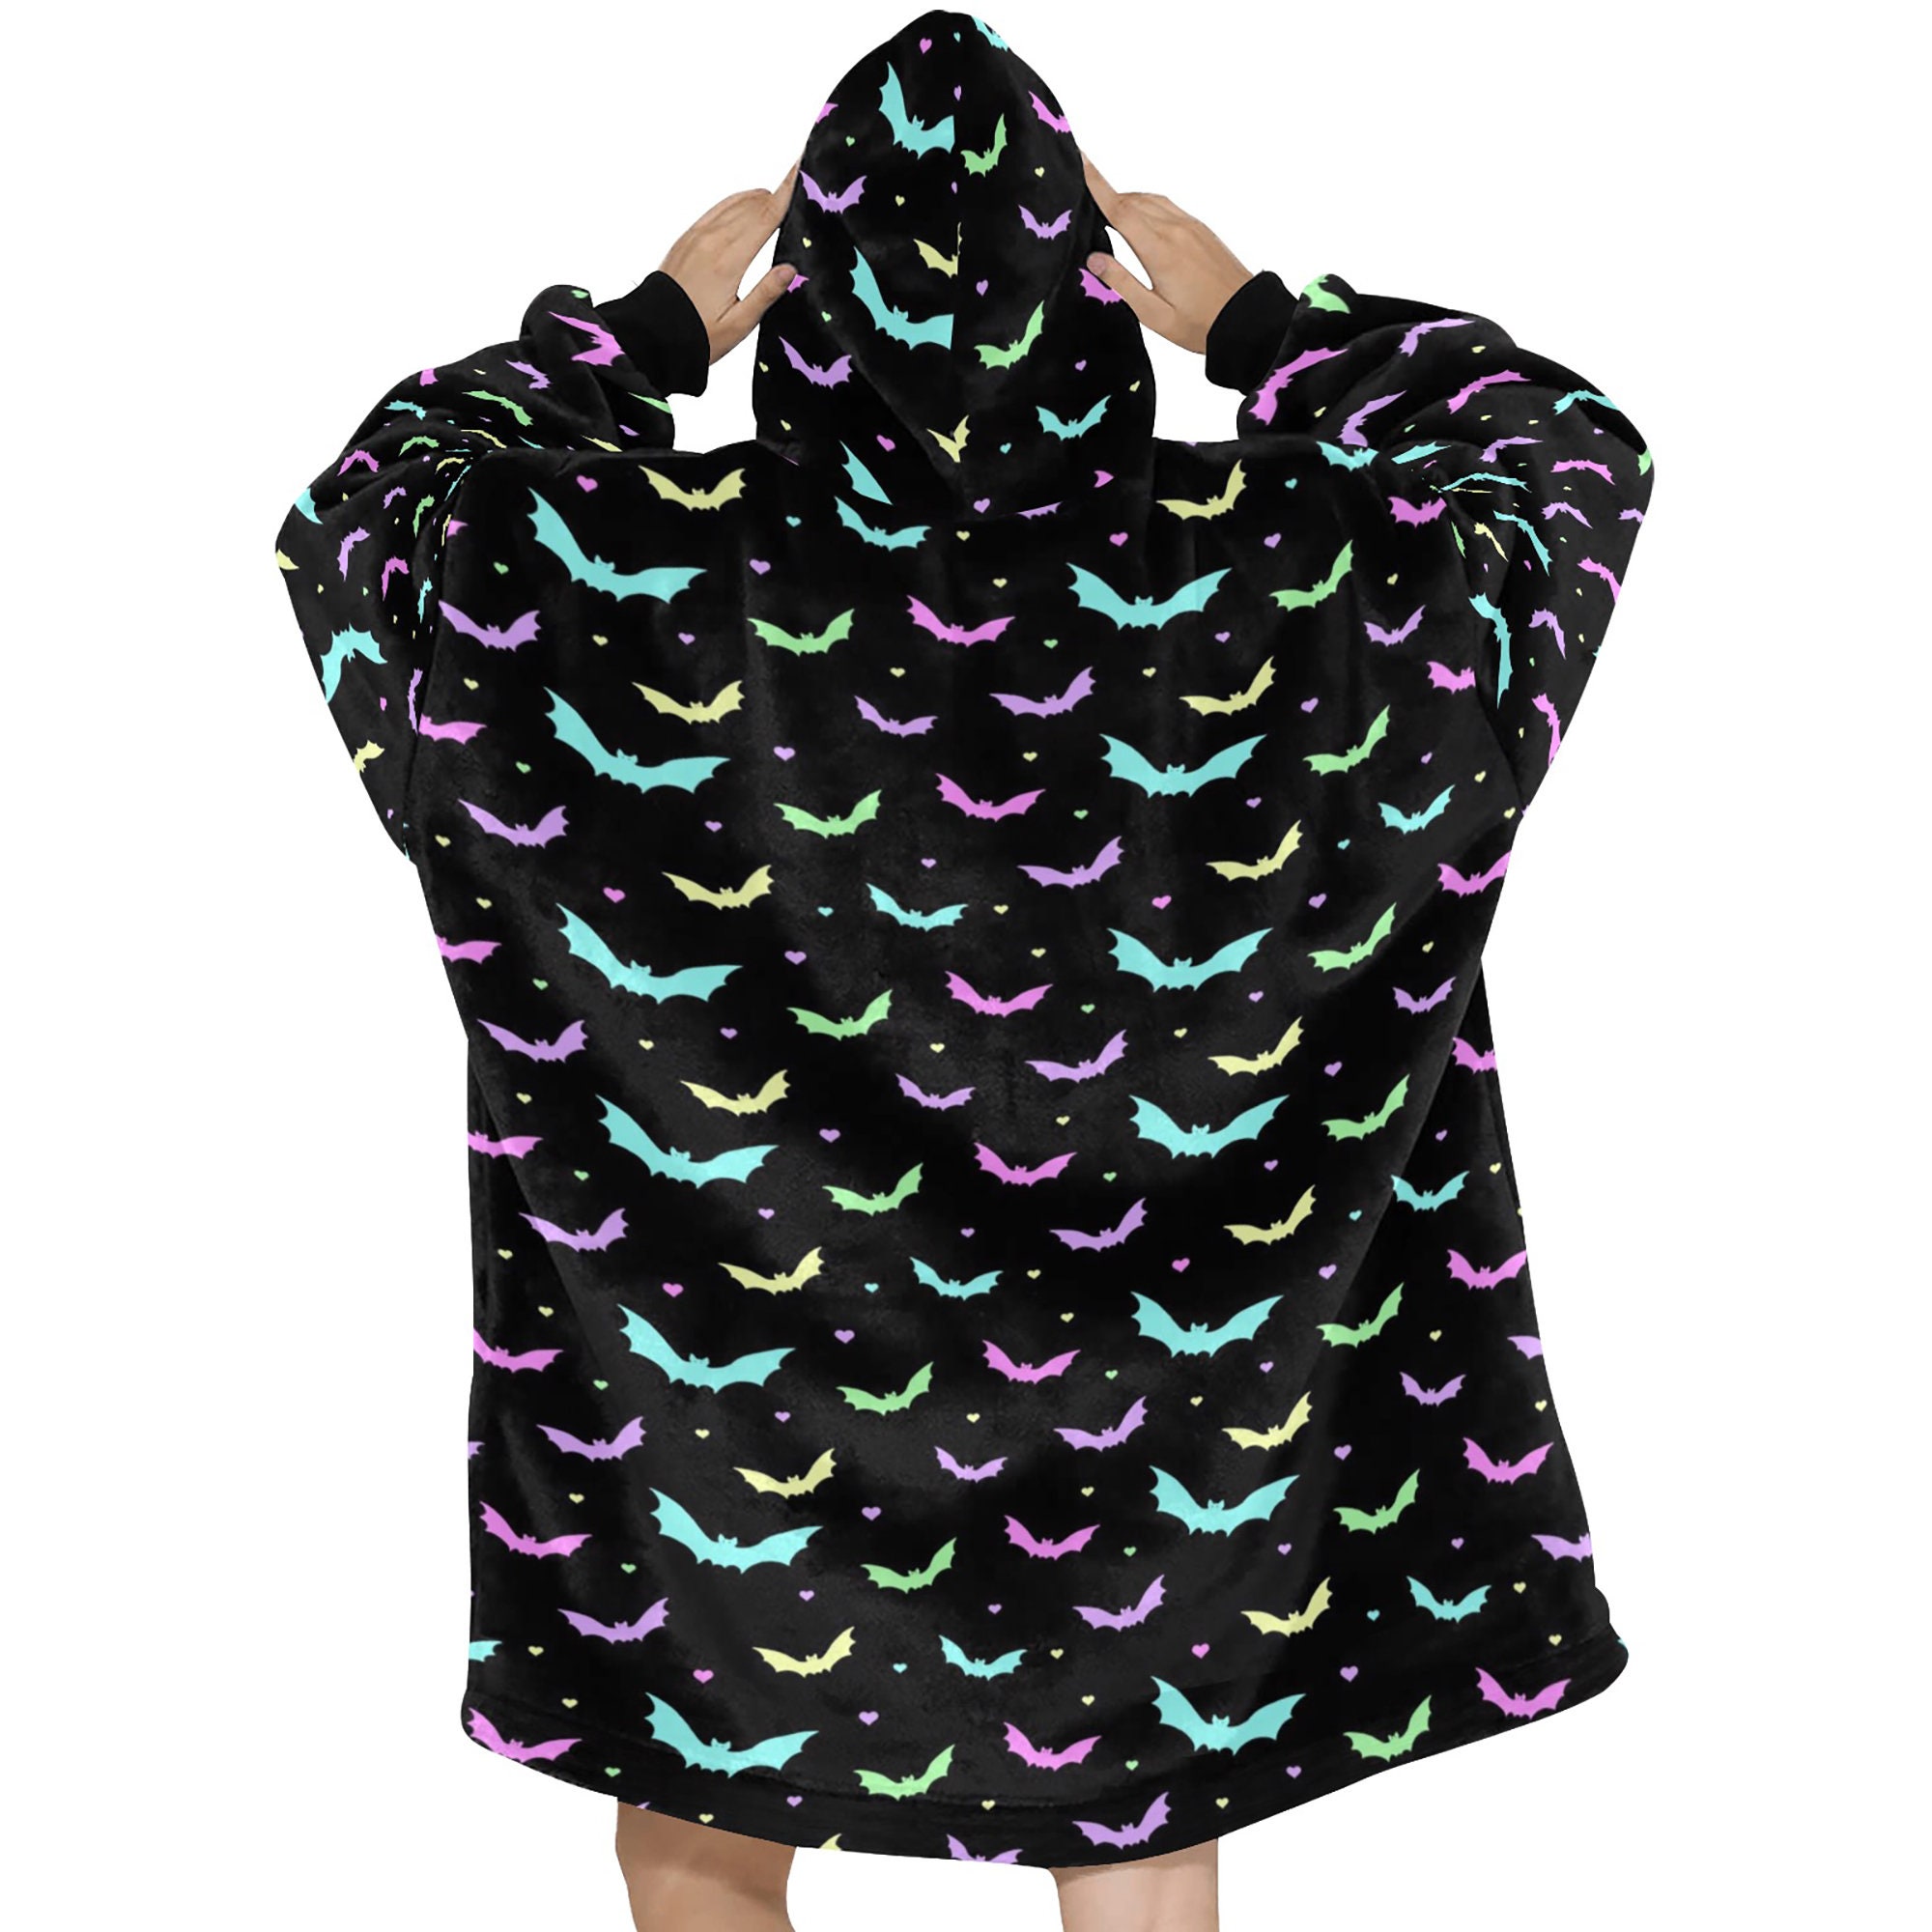 Discover Pastel Goth Bats Spooky Halloween Theme Blanket Hooded Jumper Hoodie Winter Oversized Kids Adults